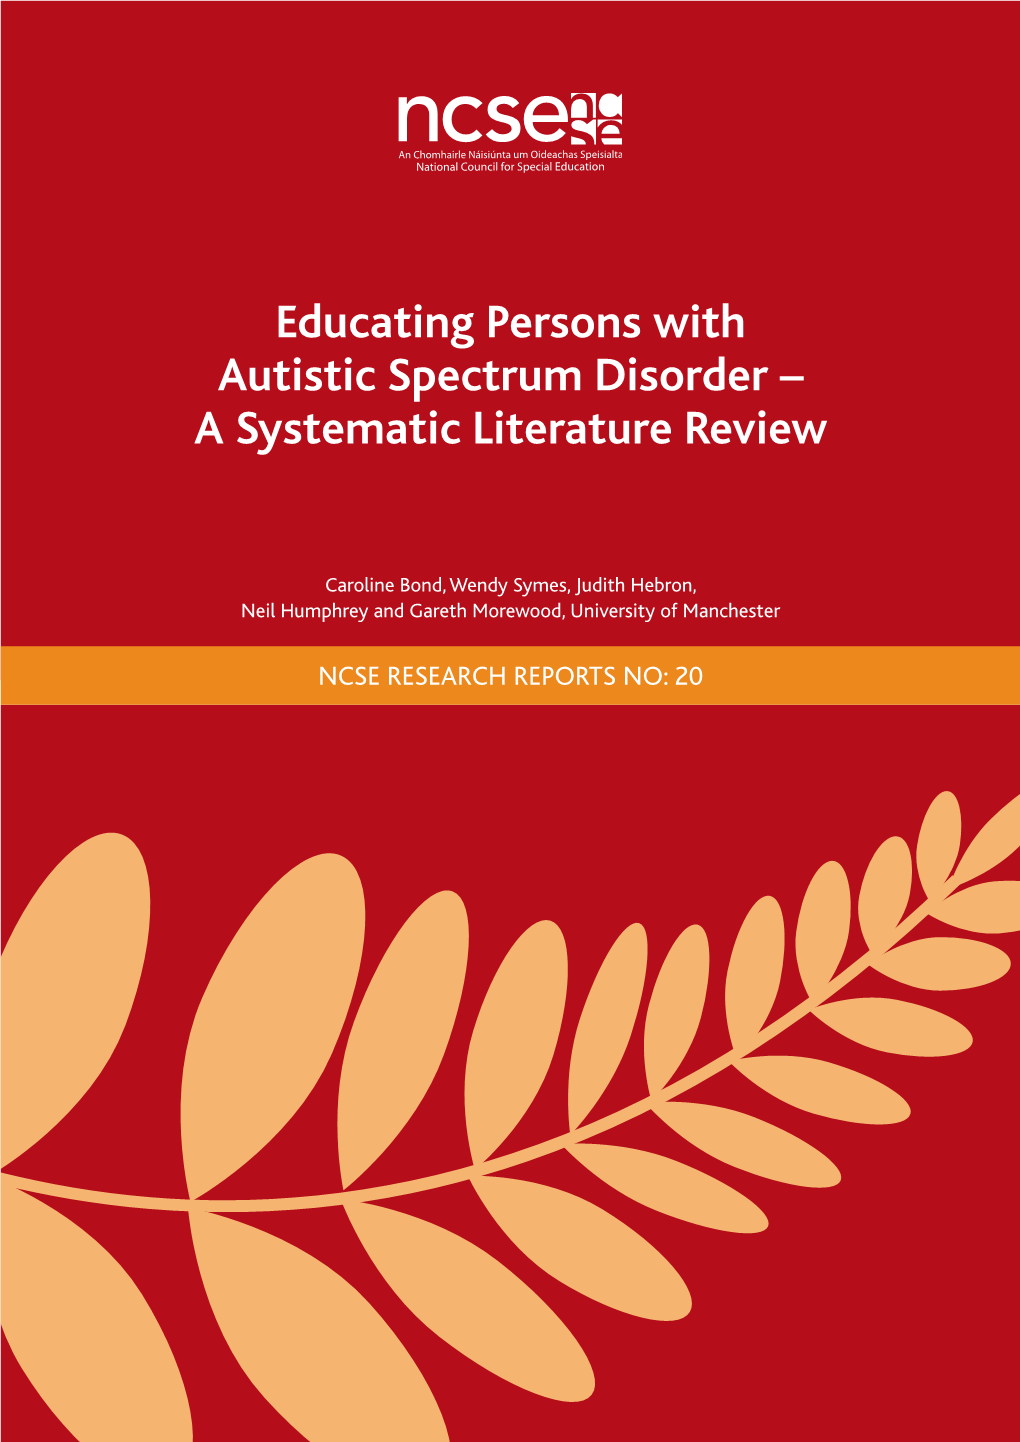 Educating Persons with Autistic Spectrum Disorder – a Systematic